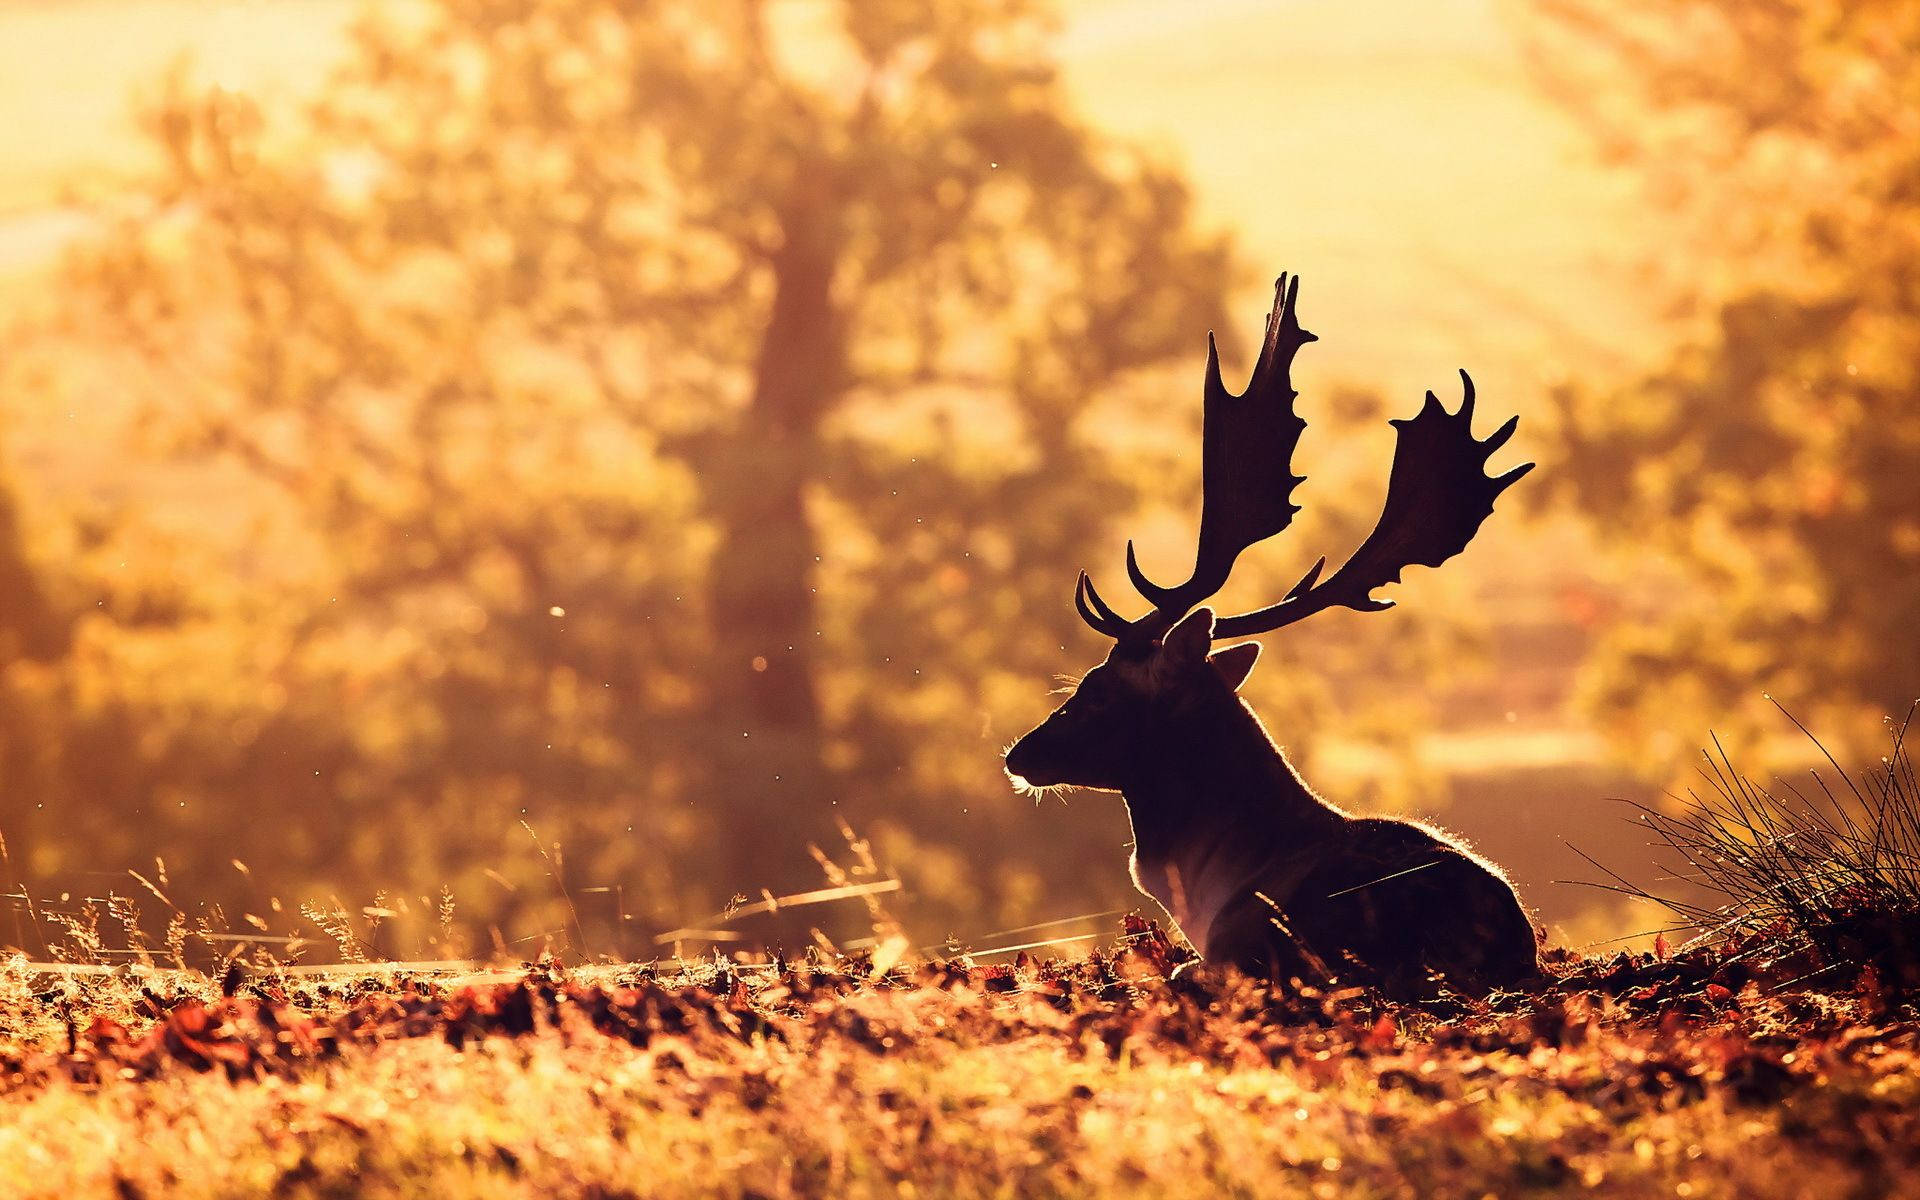 A silhouetted deer with majestic antlers Wallpaper